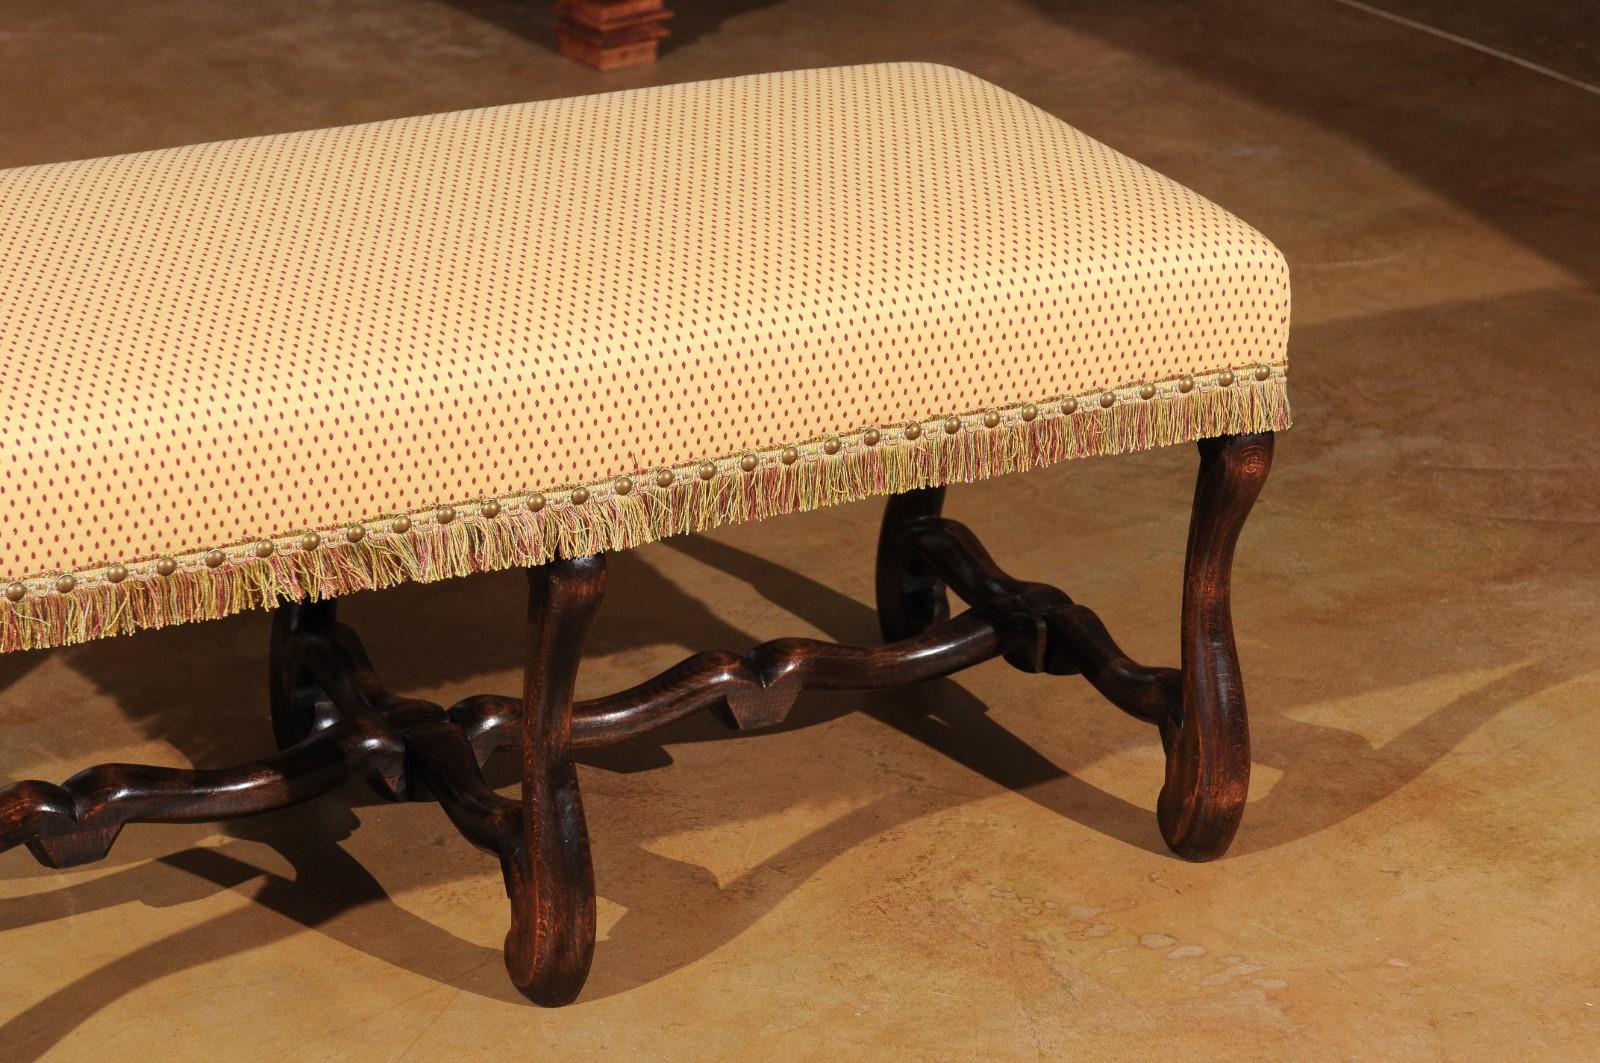 Upholstery French Louis XIII Style Upholstered Bench with Os De Mouton Legs, circa 1860